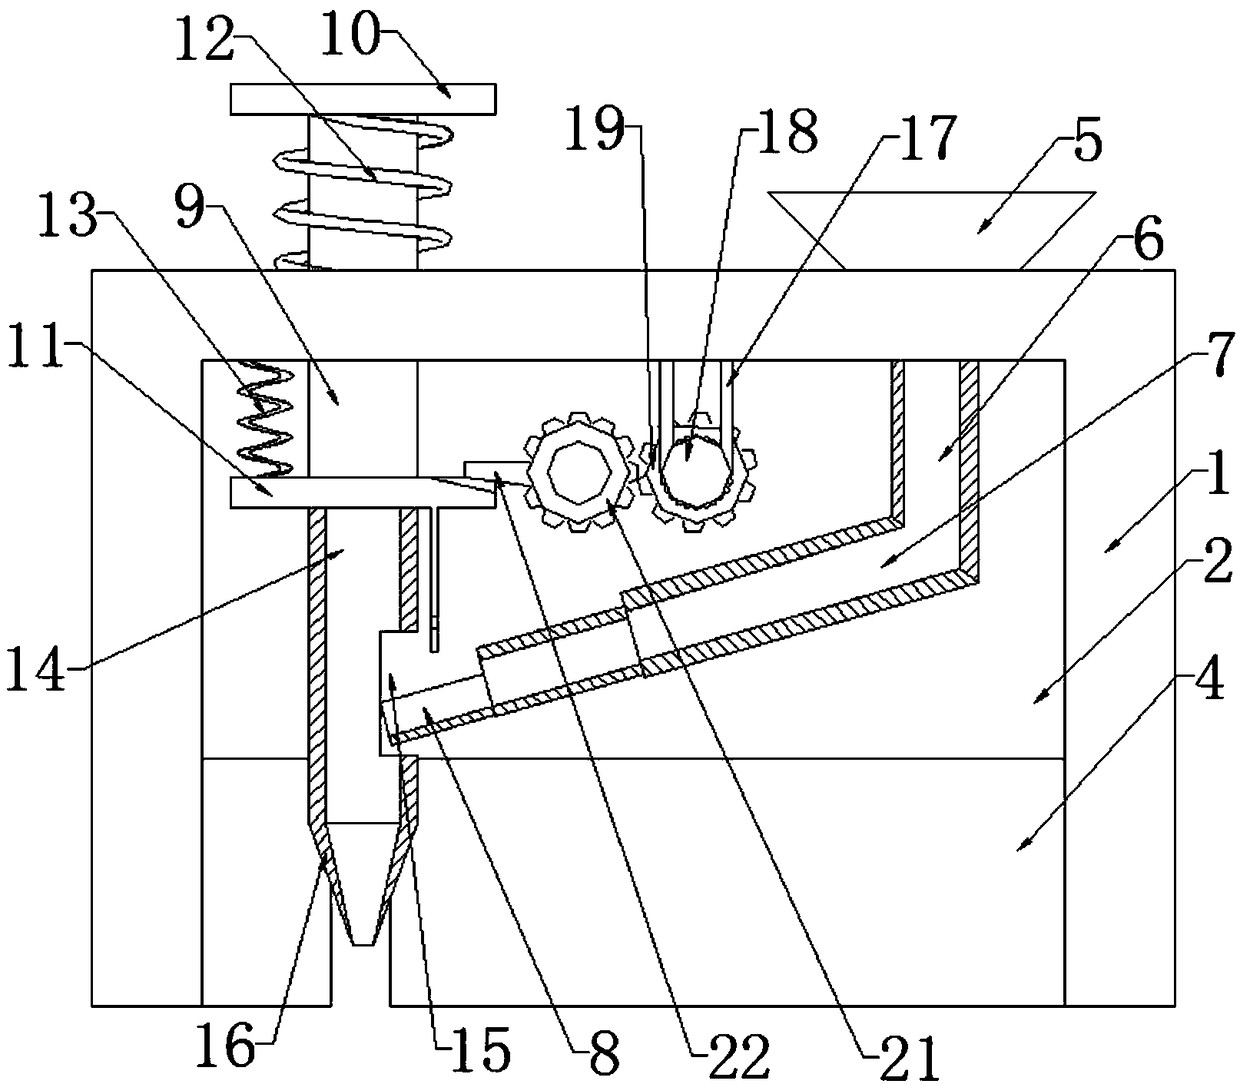 Planting cutting device